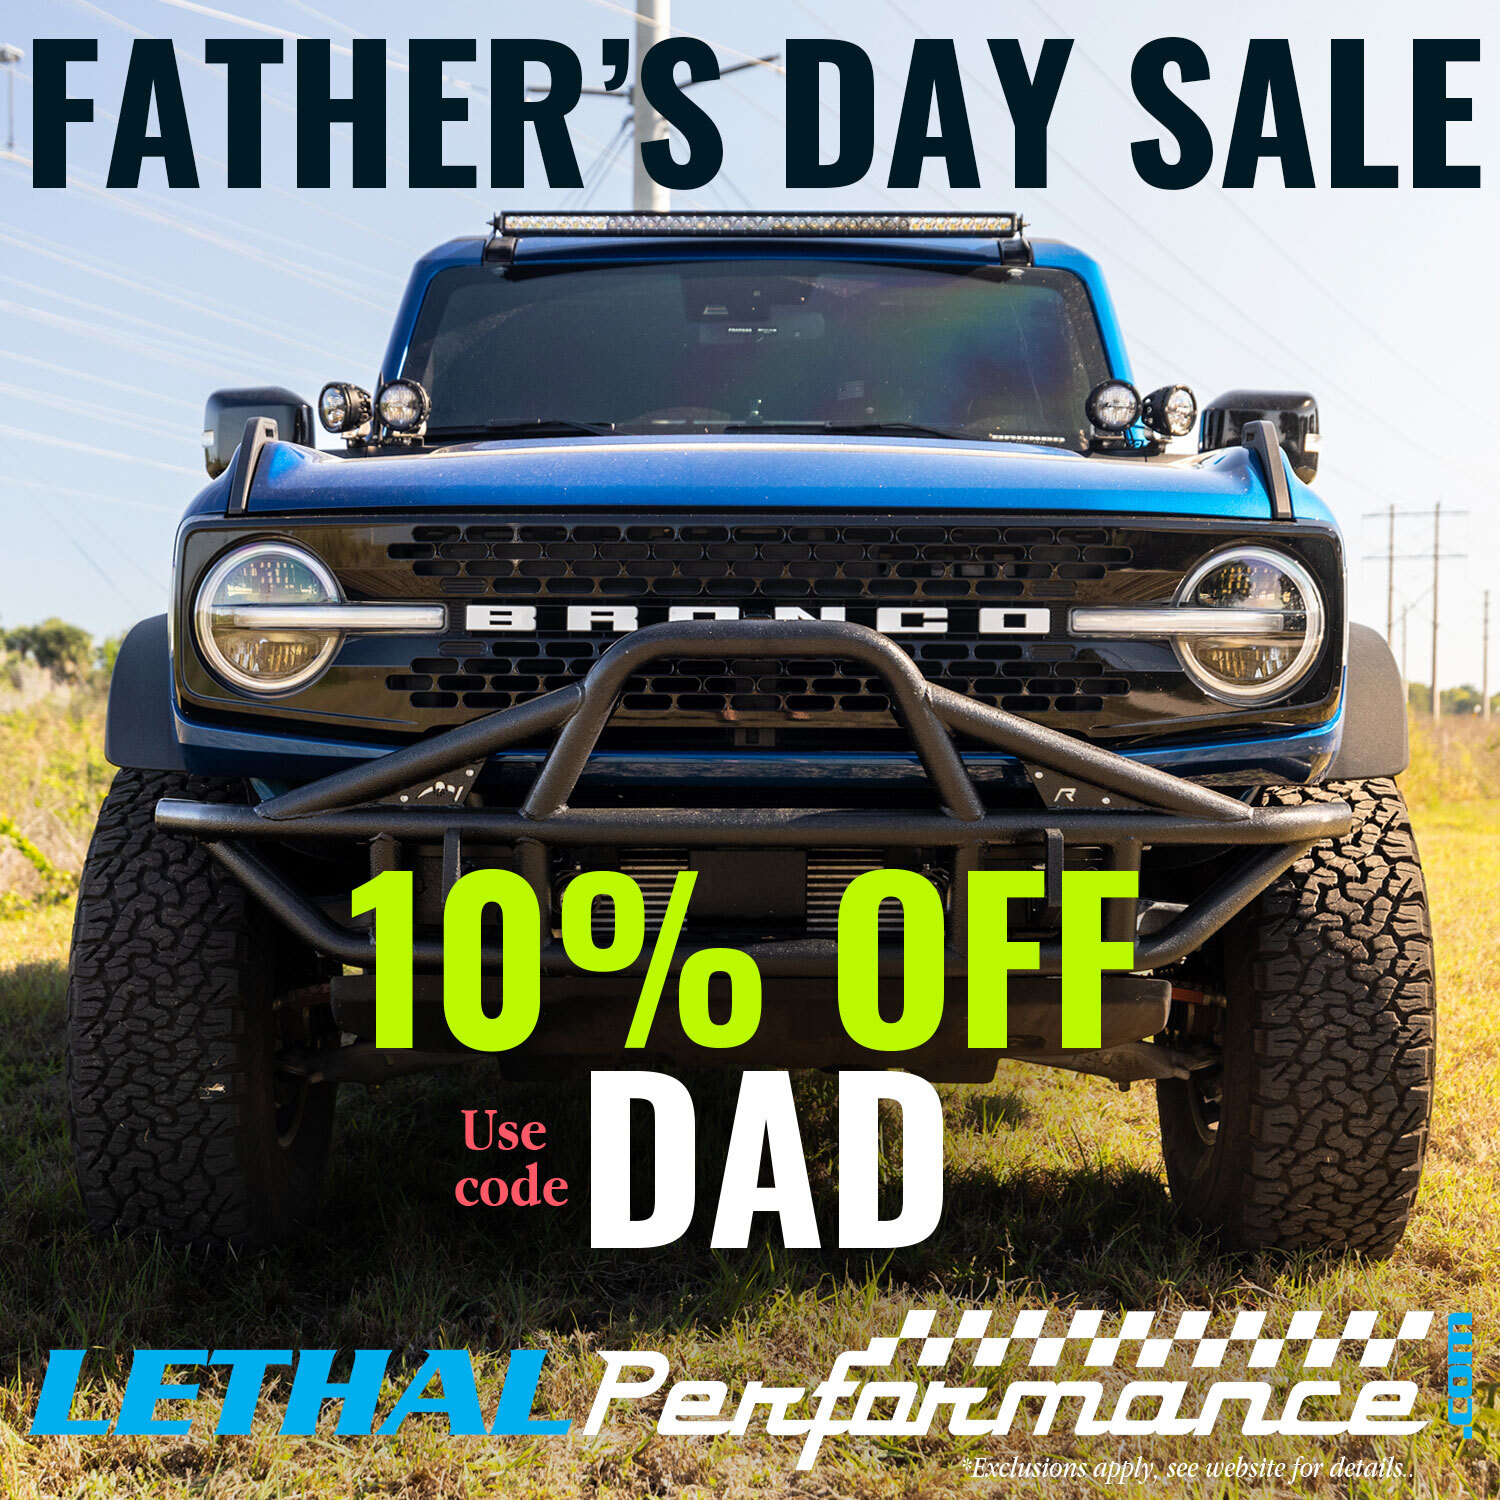 Ford Bronco Father's Day SALE is LIVE here at Lethal Performance!! sale_bronco